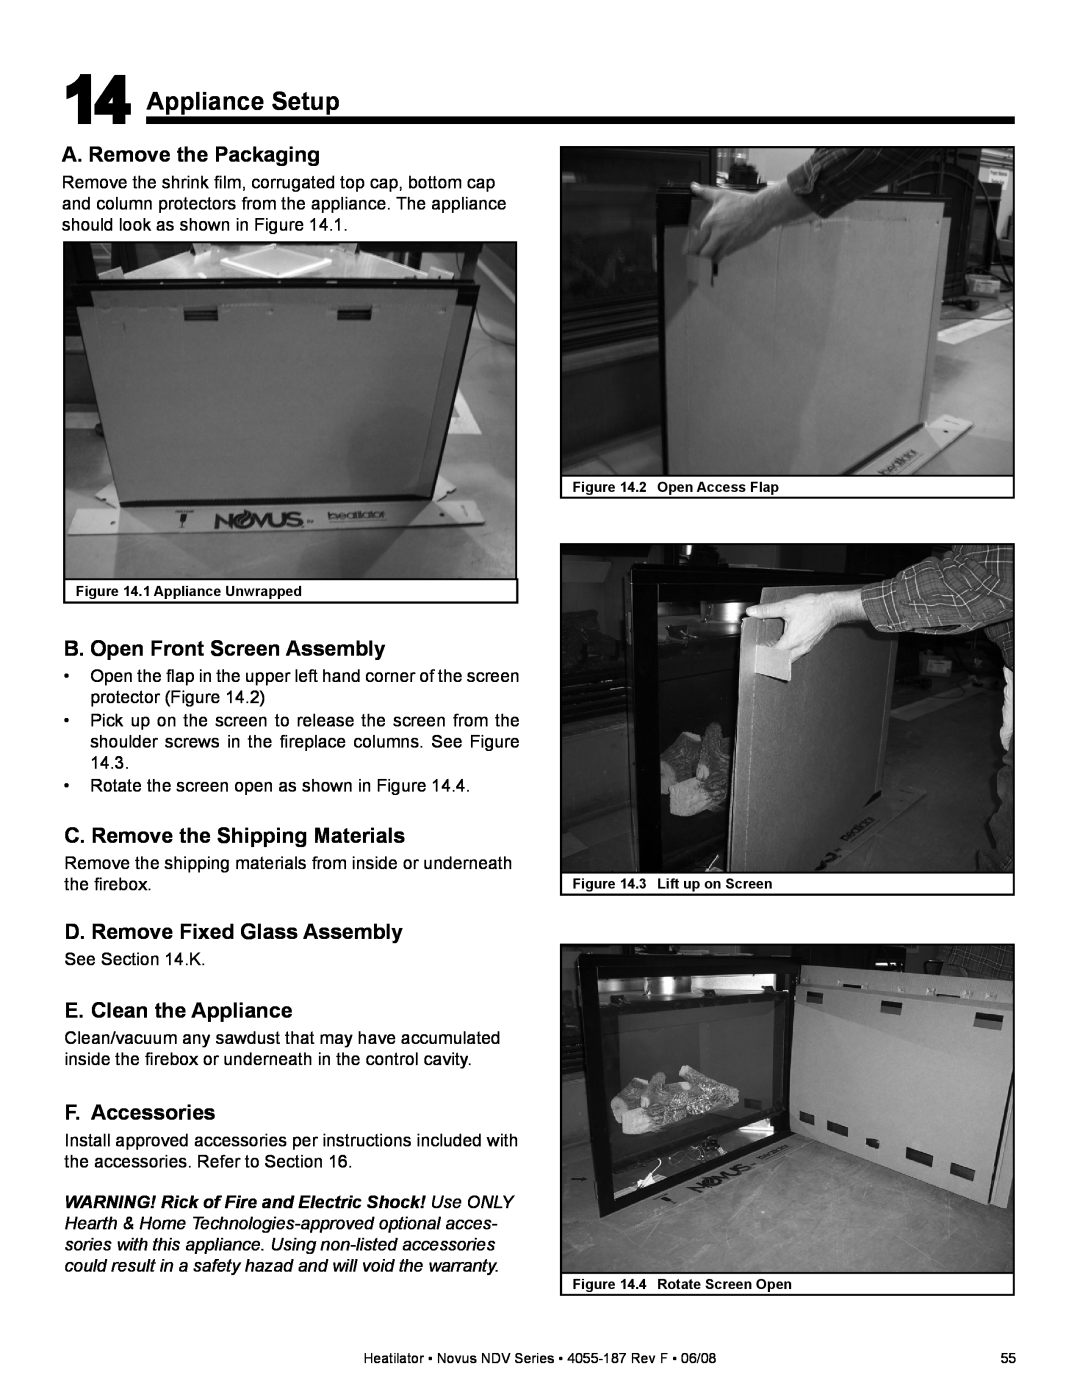 Hearth and Home Technologies NDV4842L, NDV4236IL Appliance Setup, A. Remove the Packaging, B. Open Front Screen Assembly 